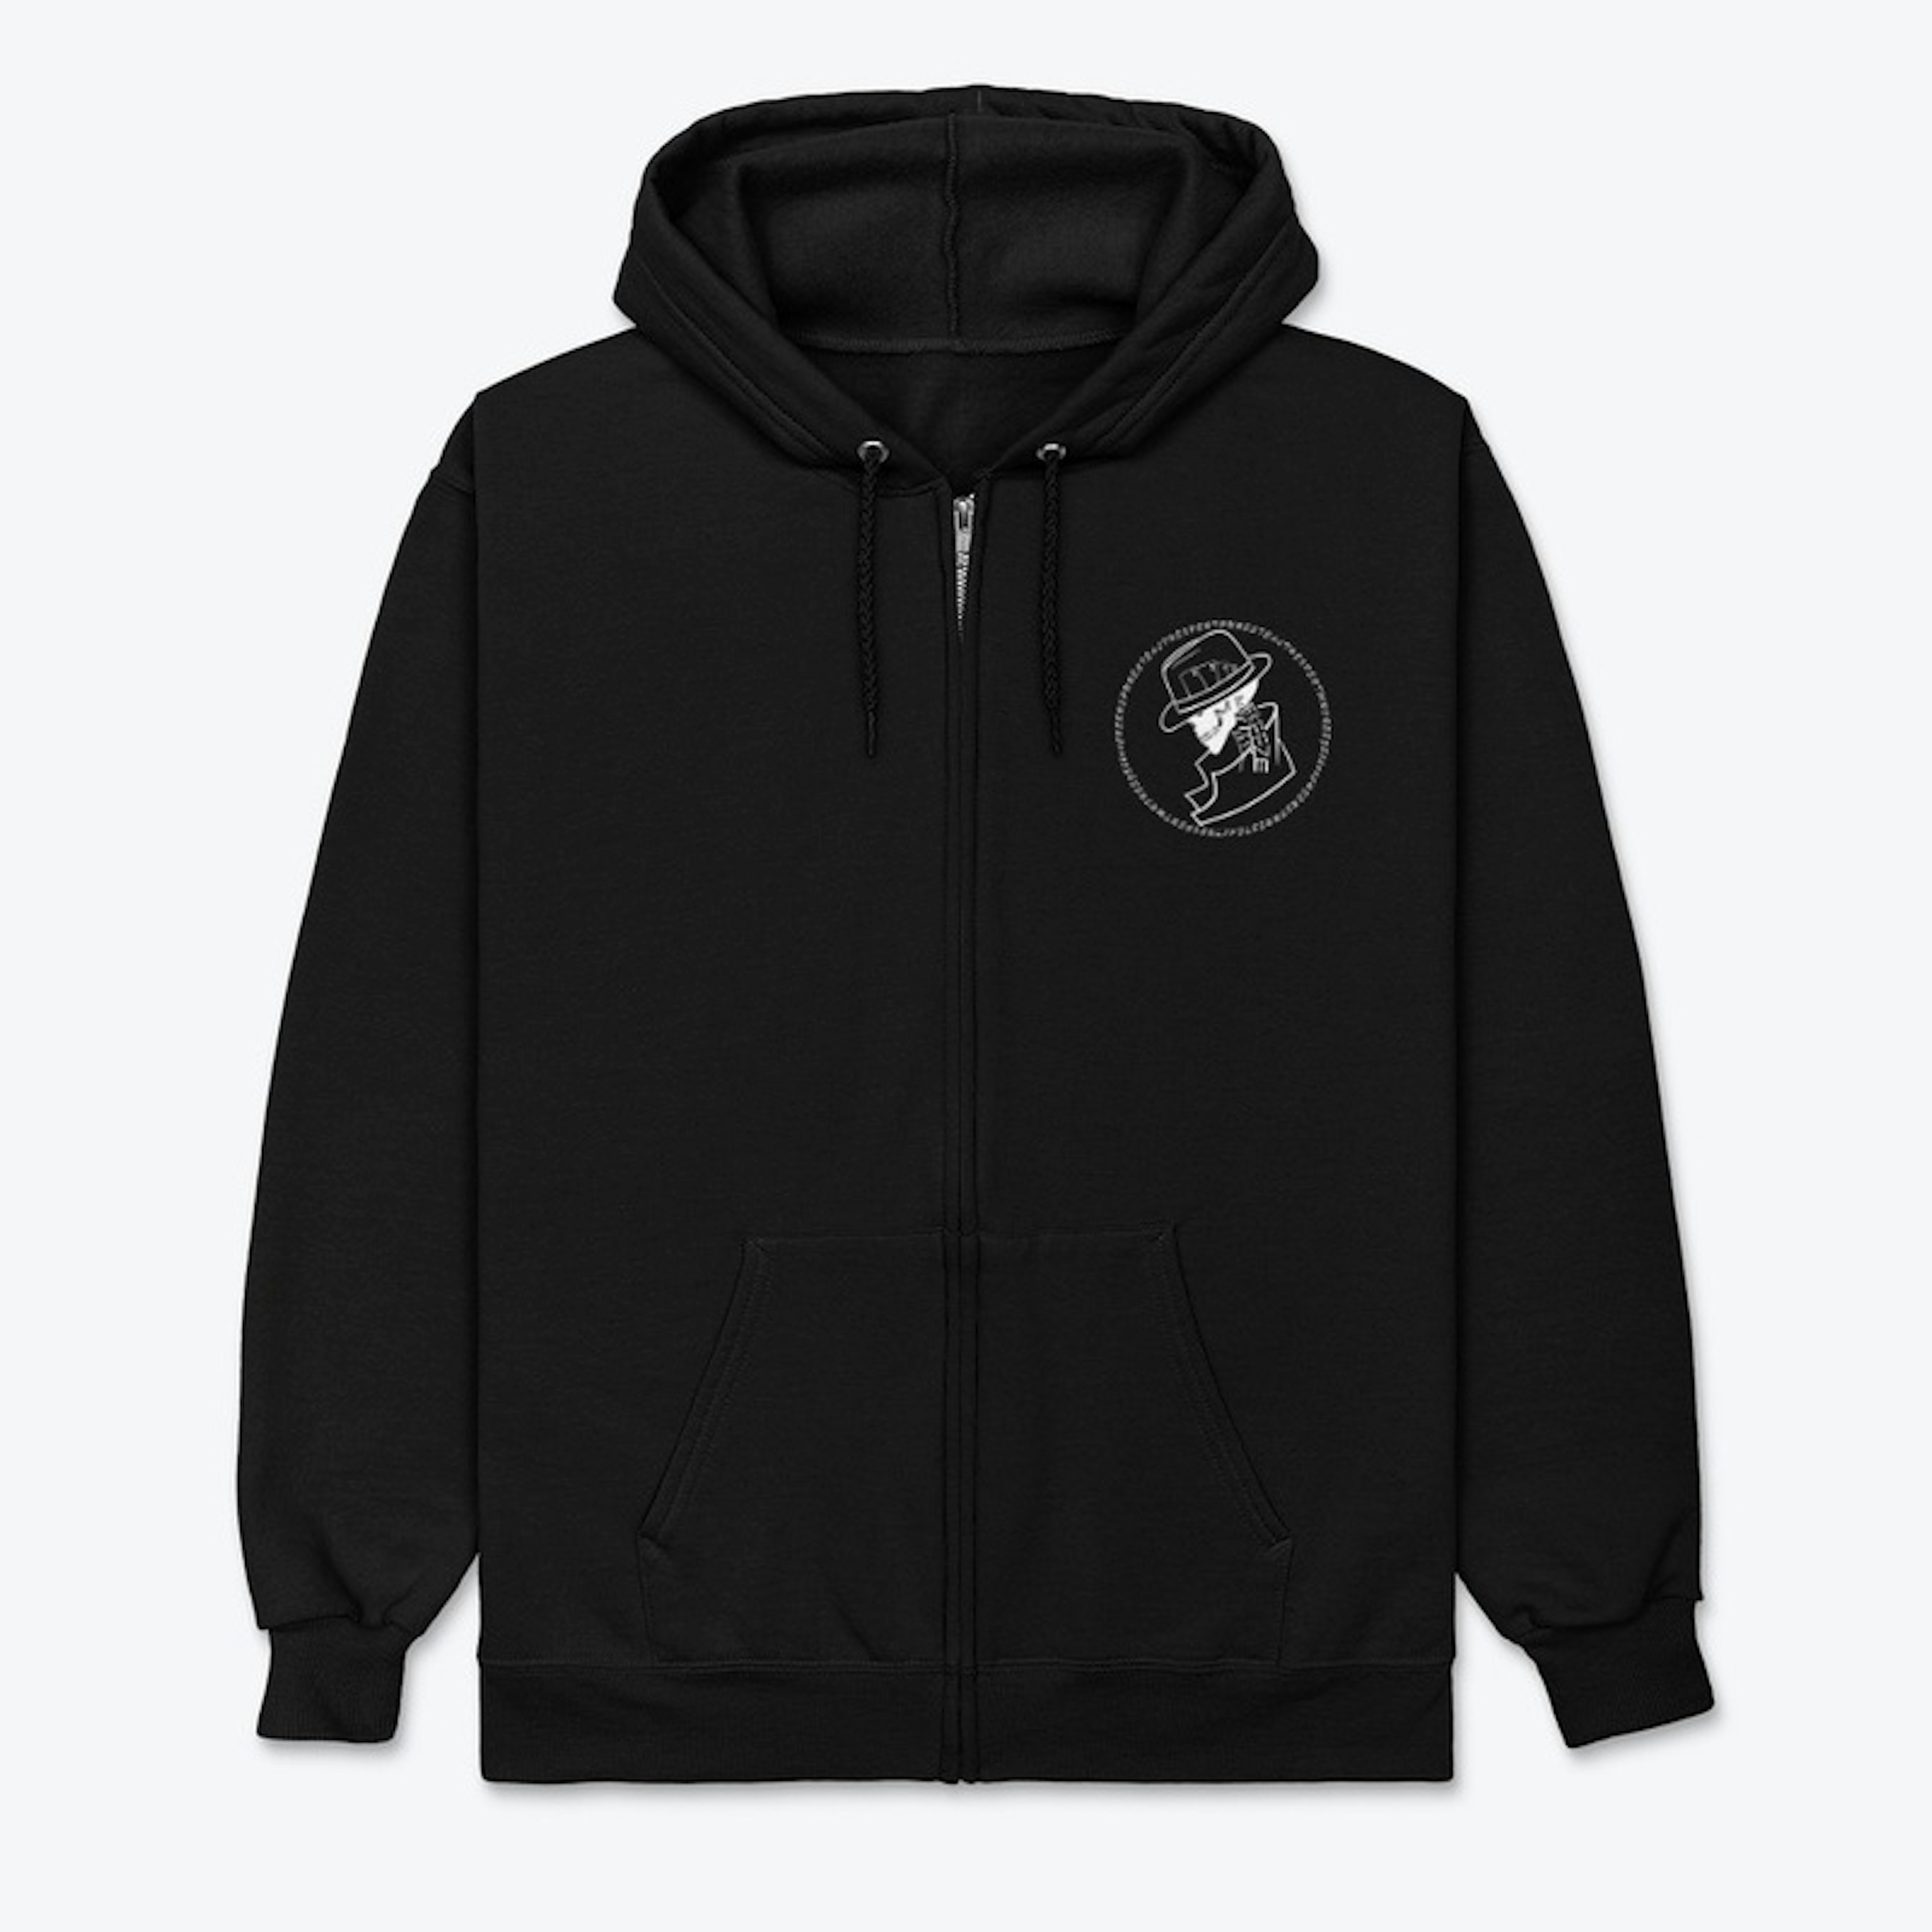 Pure Stealth Expert Zipped Hoodie